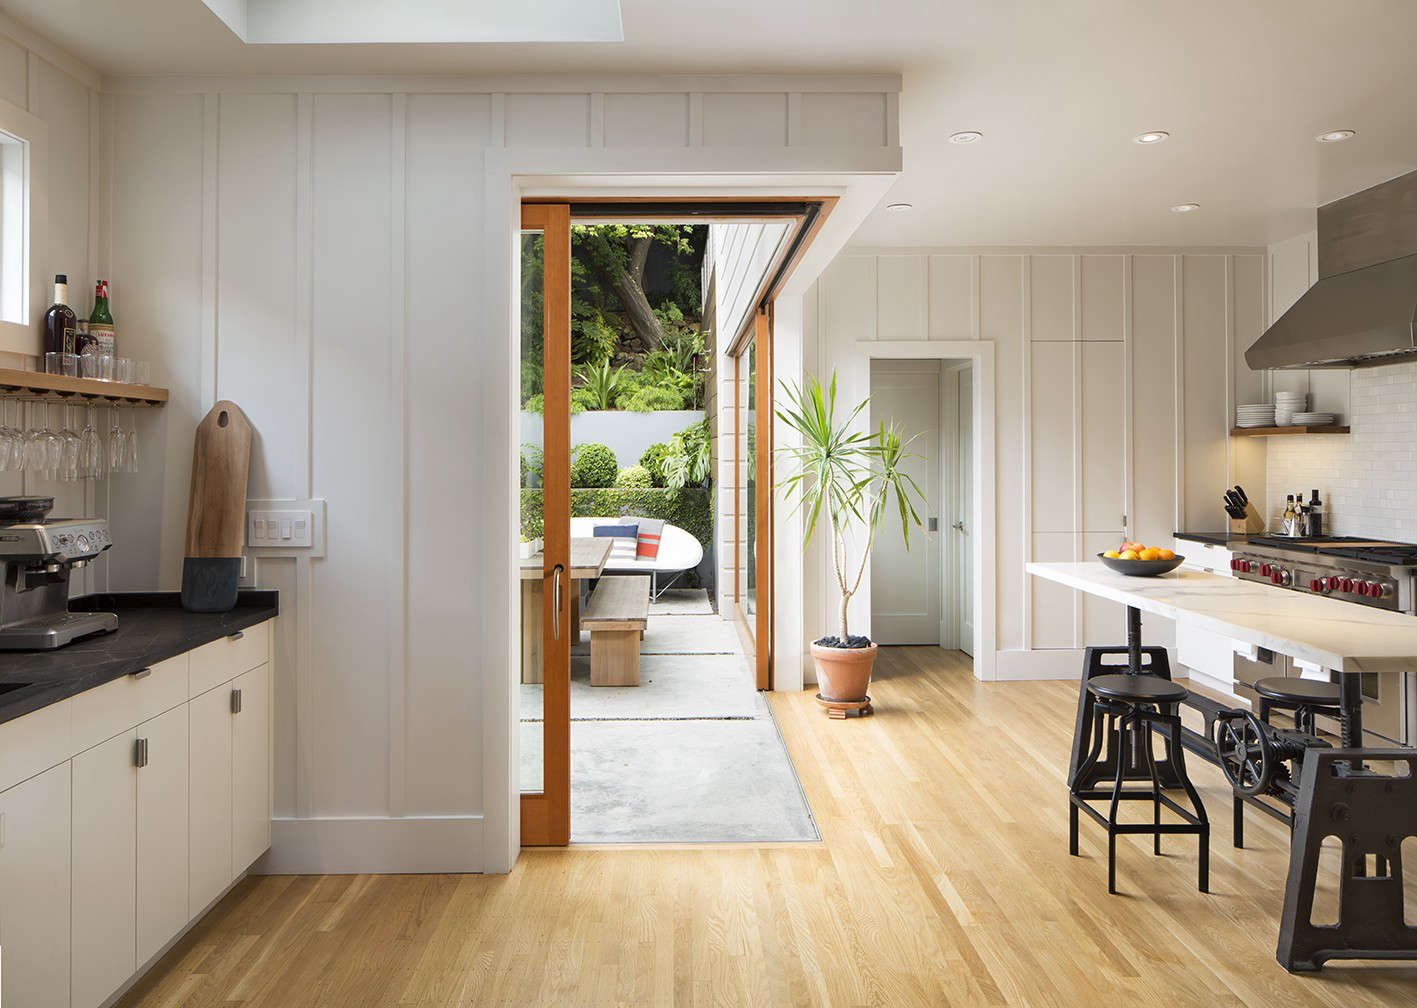 the kitchen opens out seamlessly into the garden for multiple dining spaces att 10